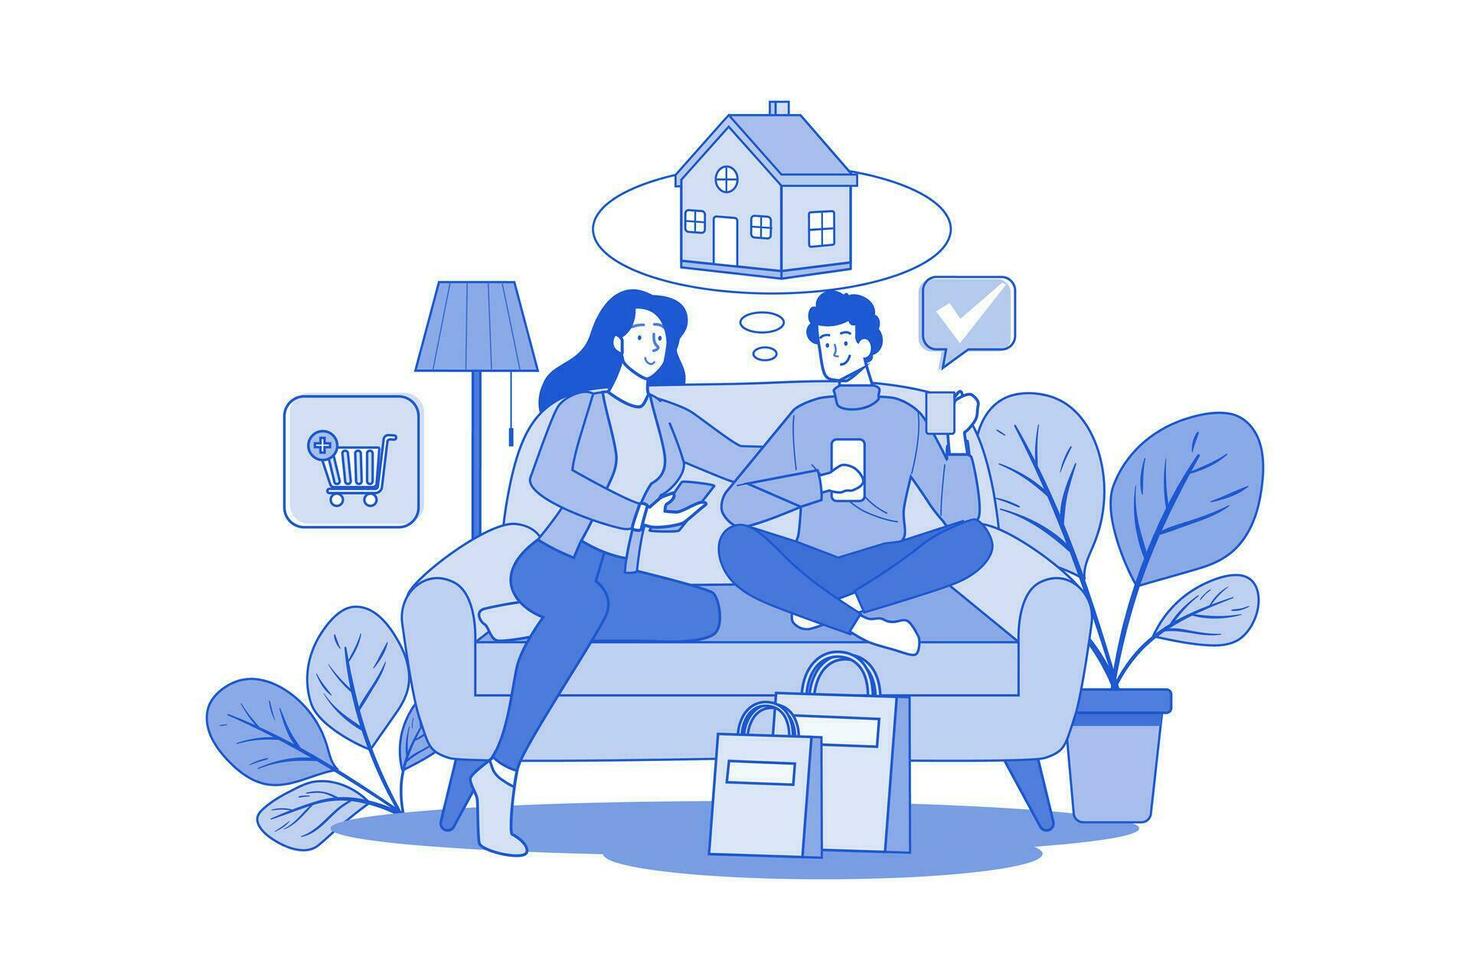 Couple Sitting On The Sofa And Thinking About The Goods They Want To Buy vector